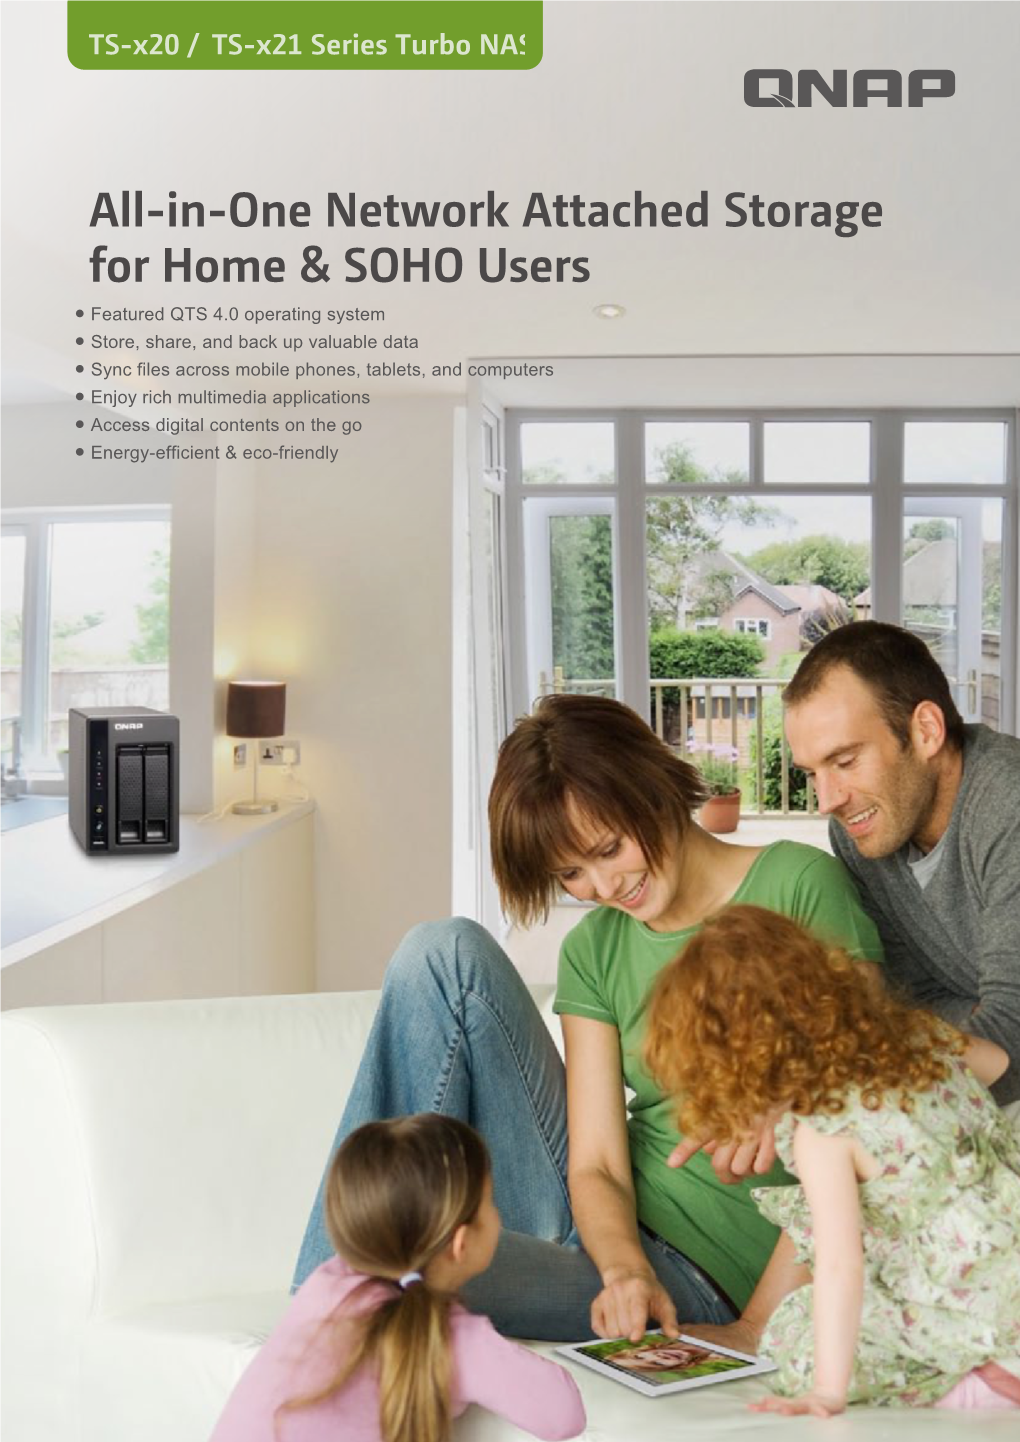 All-In-One Network Attached Storage for Home & SOHO Users